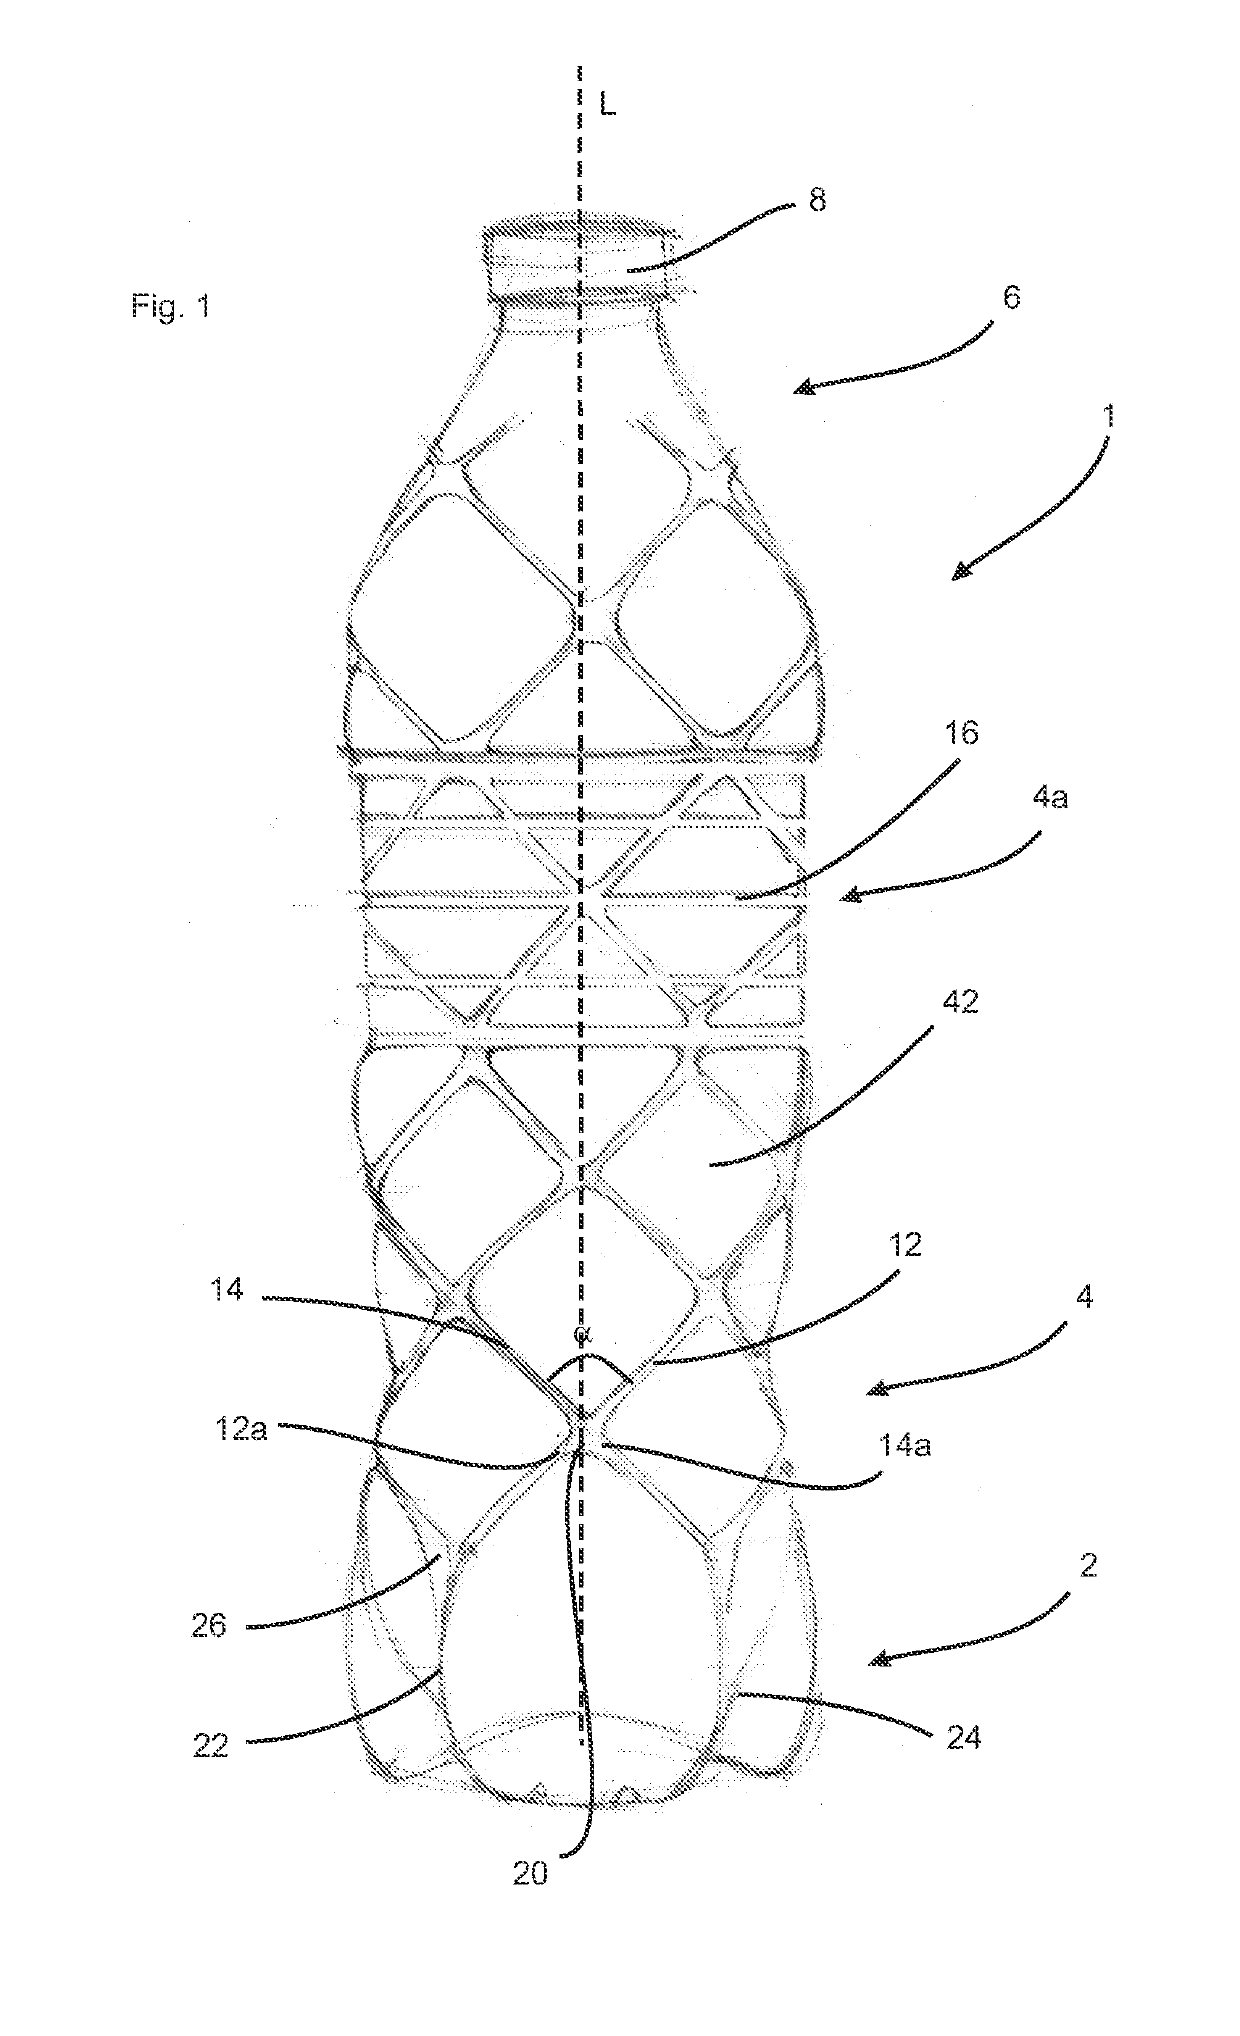 Plastics material bottle with intersecting tension bands